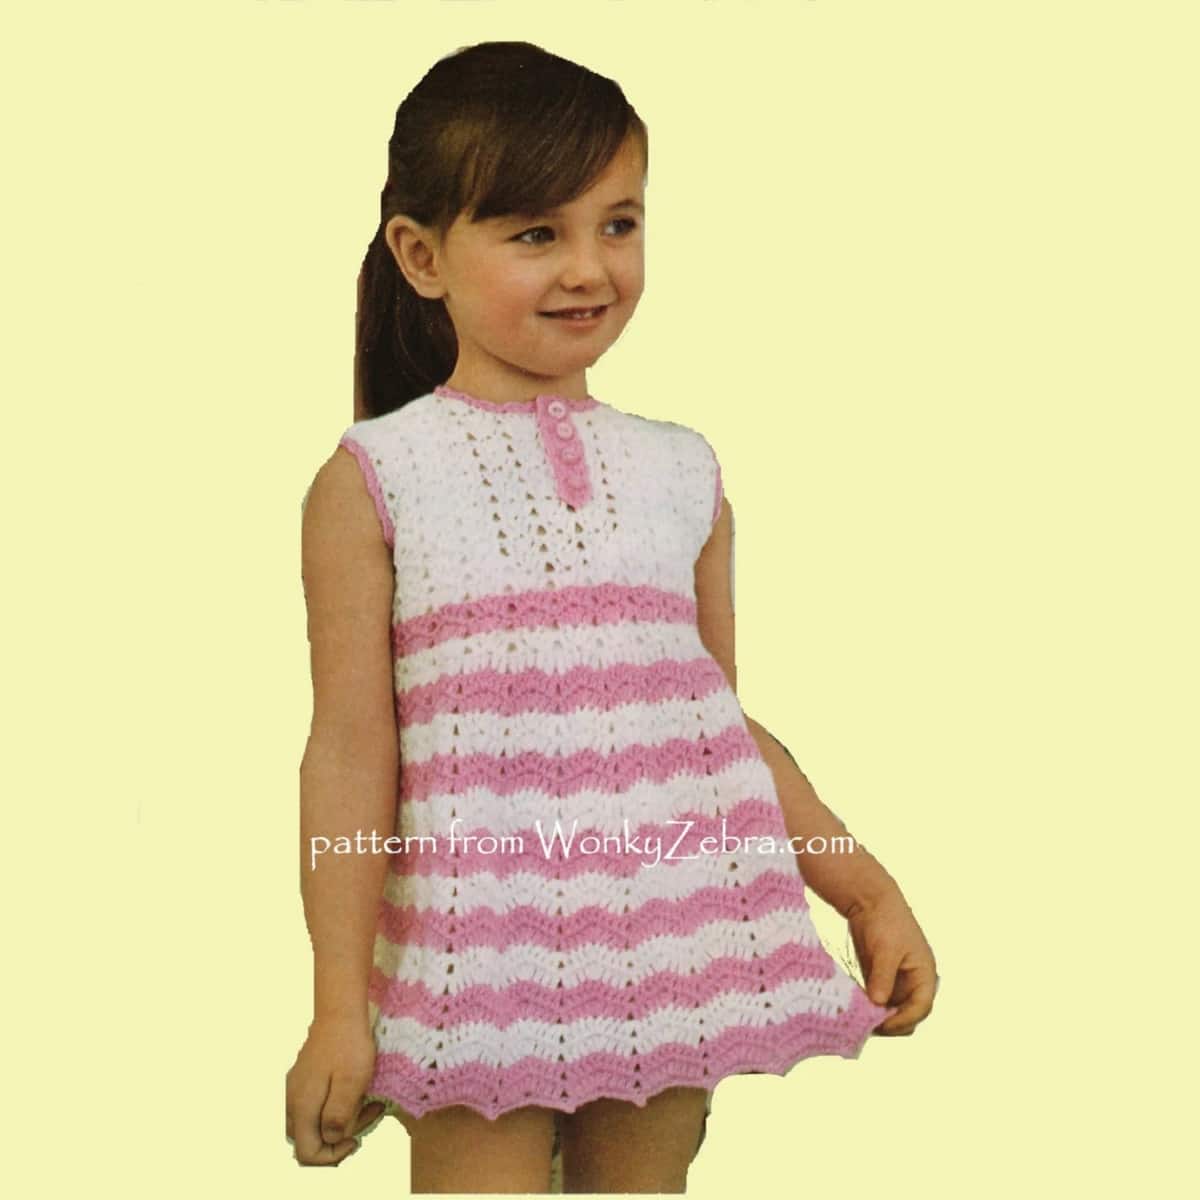 Young girl standing wearing a cream and pink crochet dress with zig-zag stripes from the chest to the bottom of the dress.